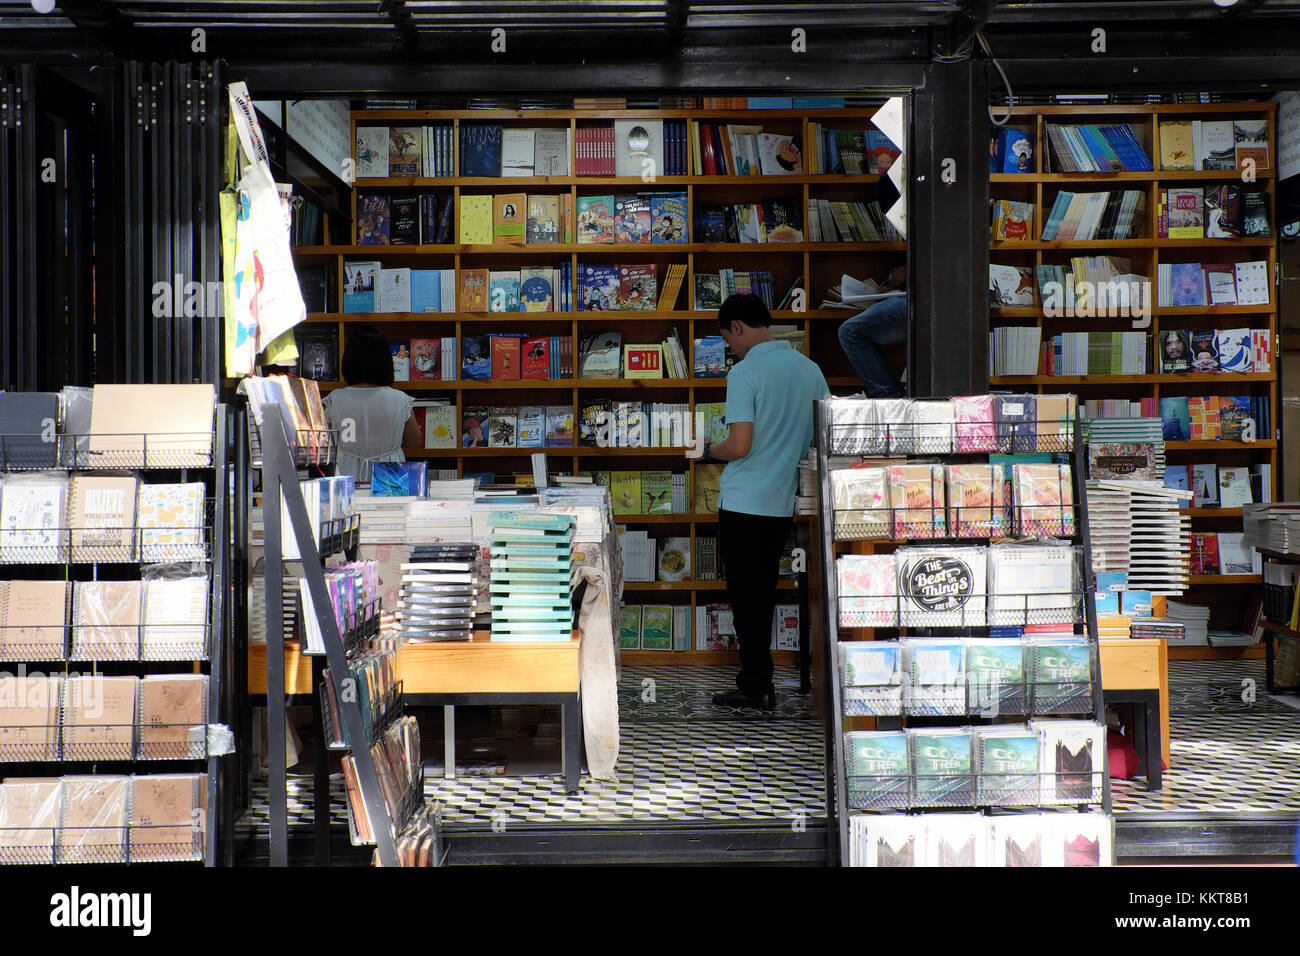 HO CHI MINH CITY, VIET NAM- DEC 1, 2017: Book street with many bookstore at center of city, publishing company show colorful books outdoor of shop Stock Photo